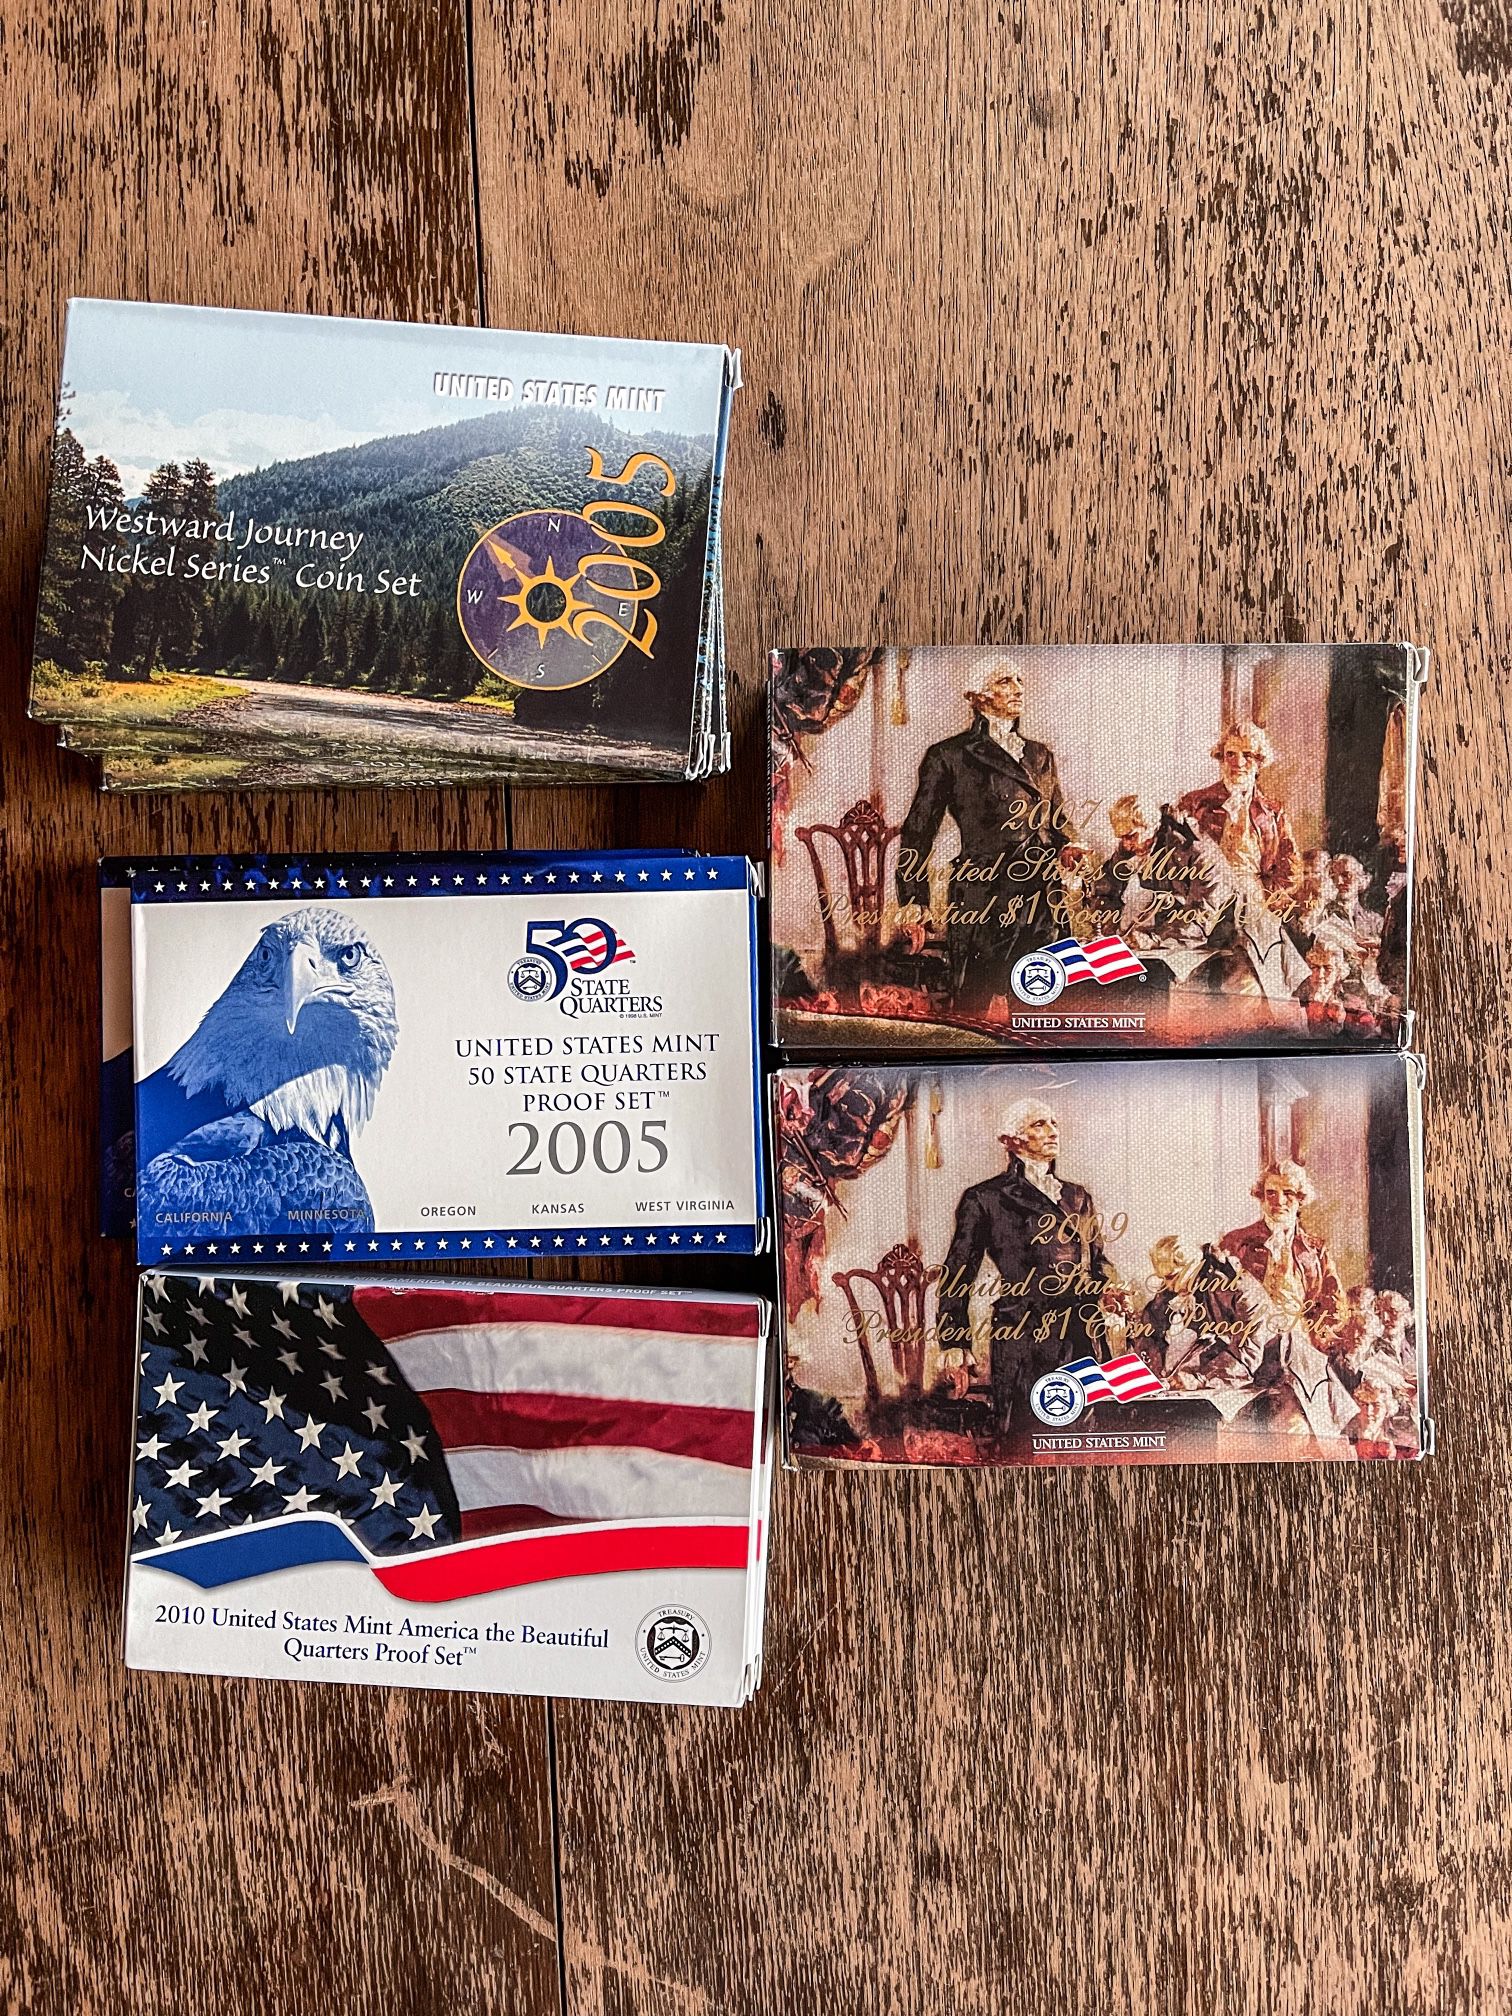 United States Mint proof sets and coin sets